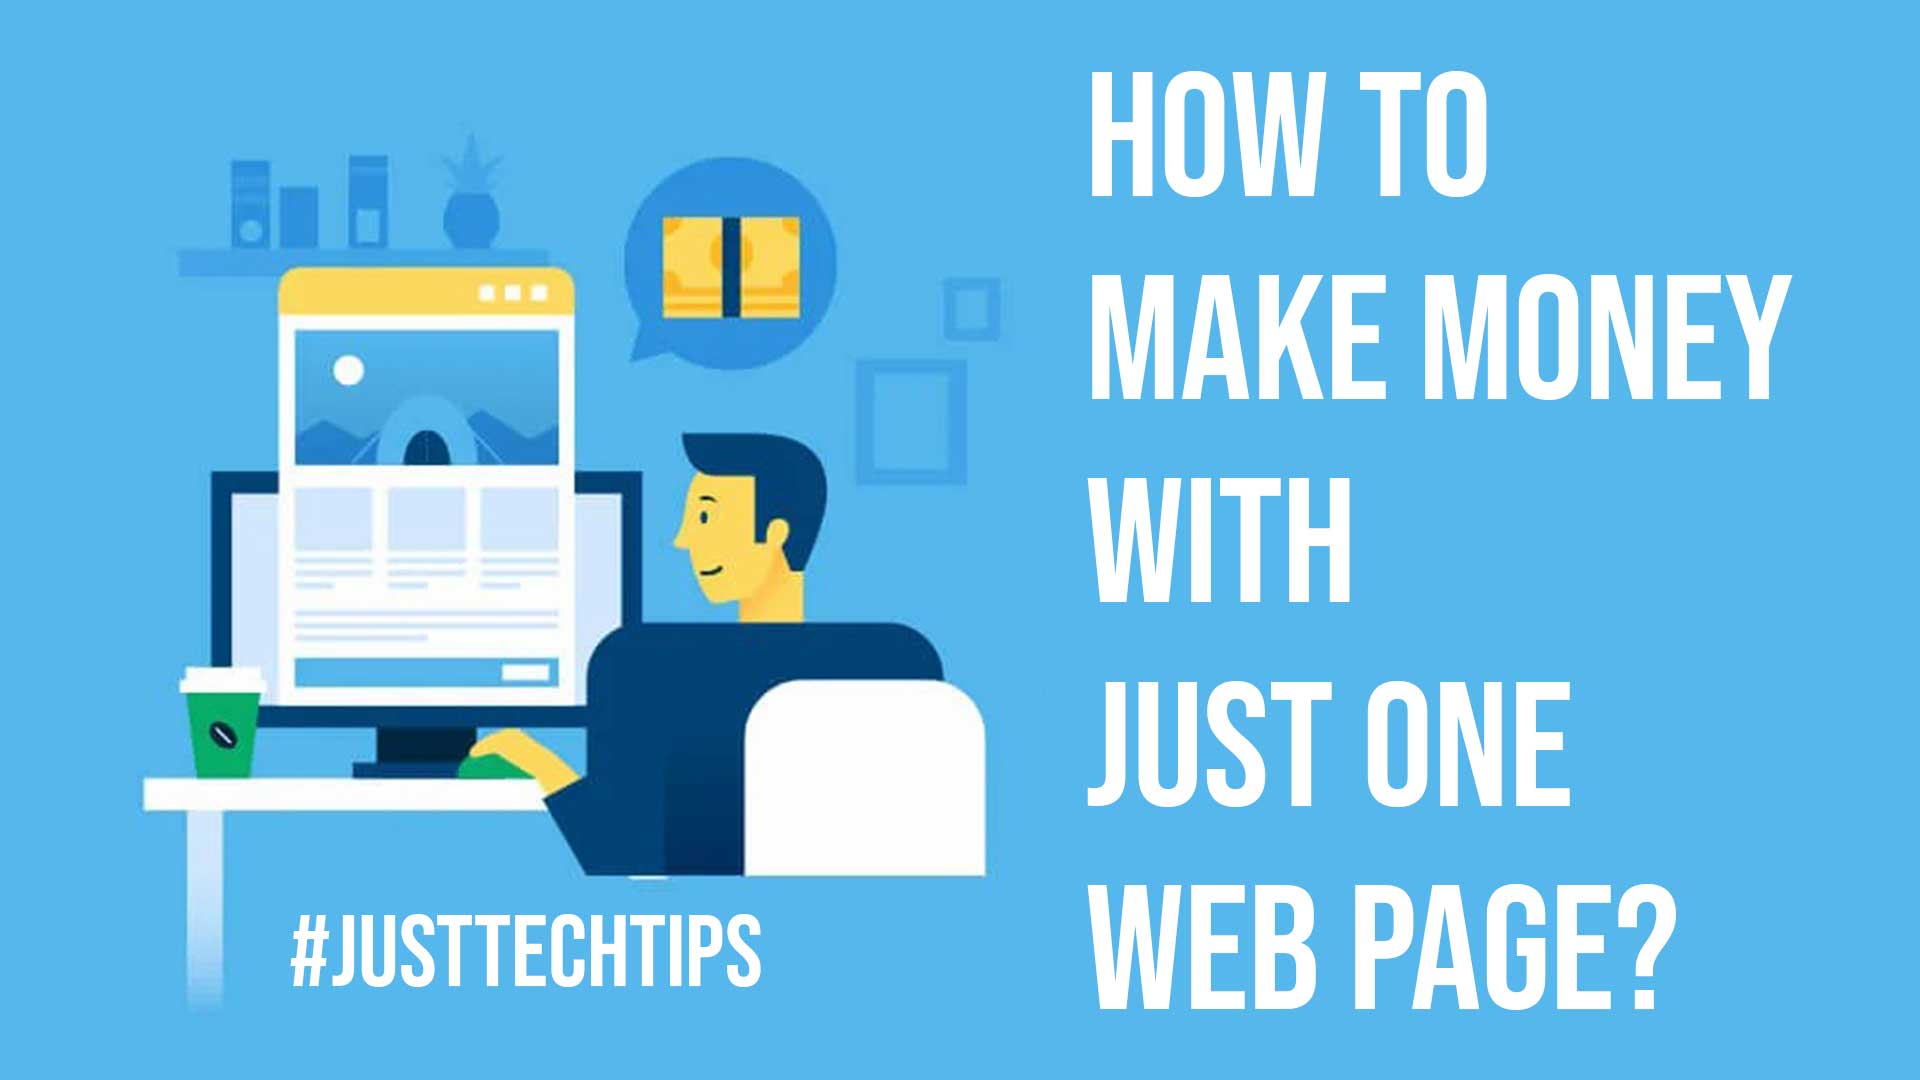 How to Make Money With Just One Web Page